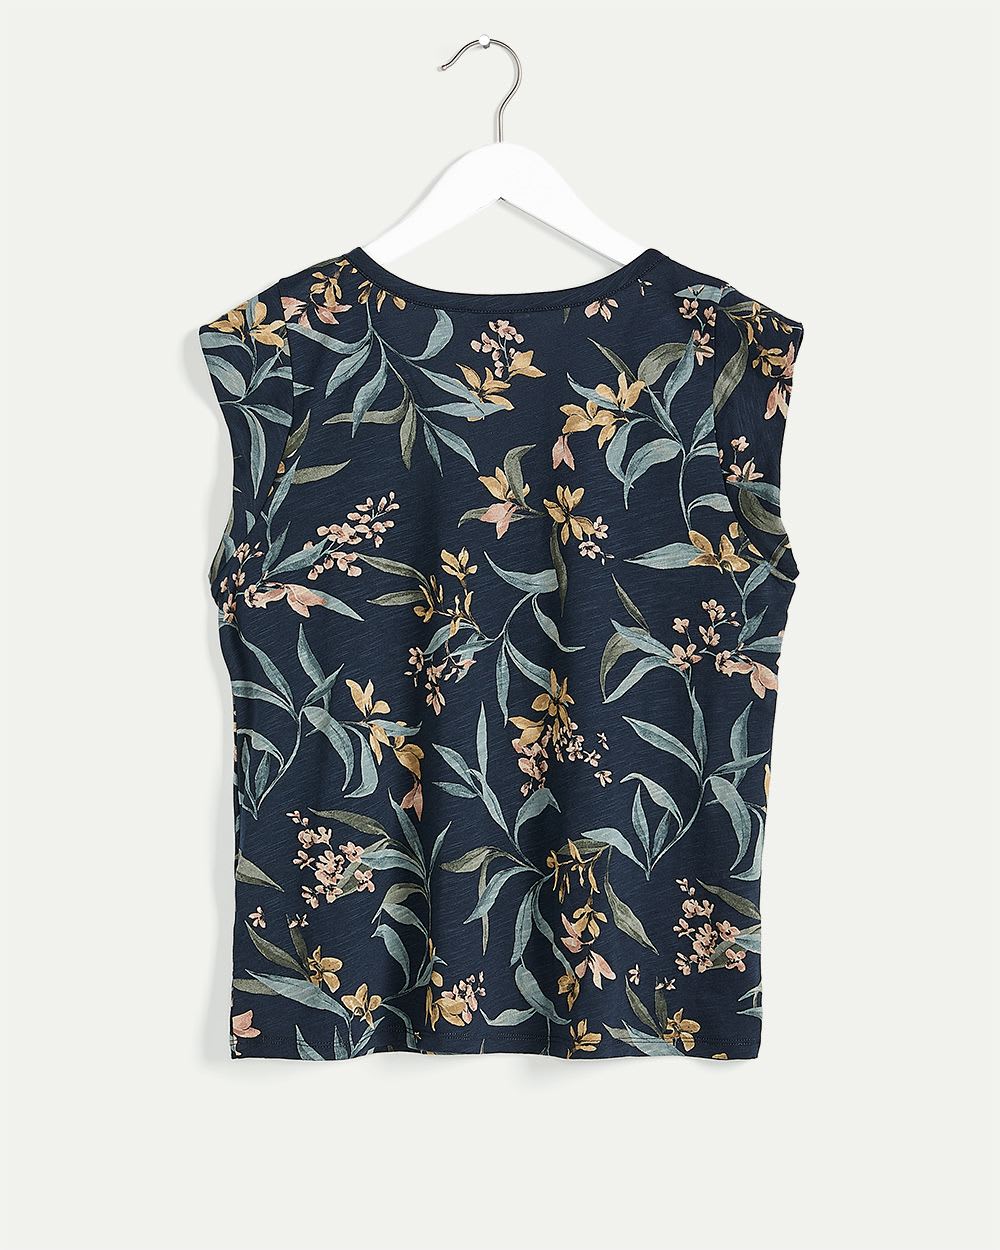 Cap Sleeve Printed Buttoned V-Neck Tee